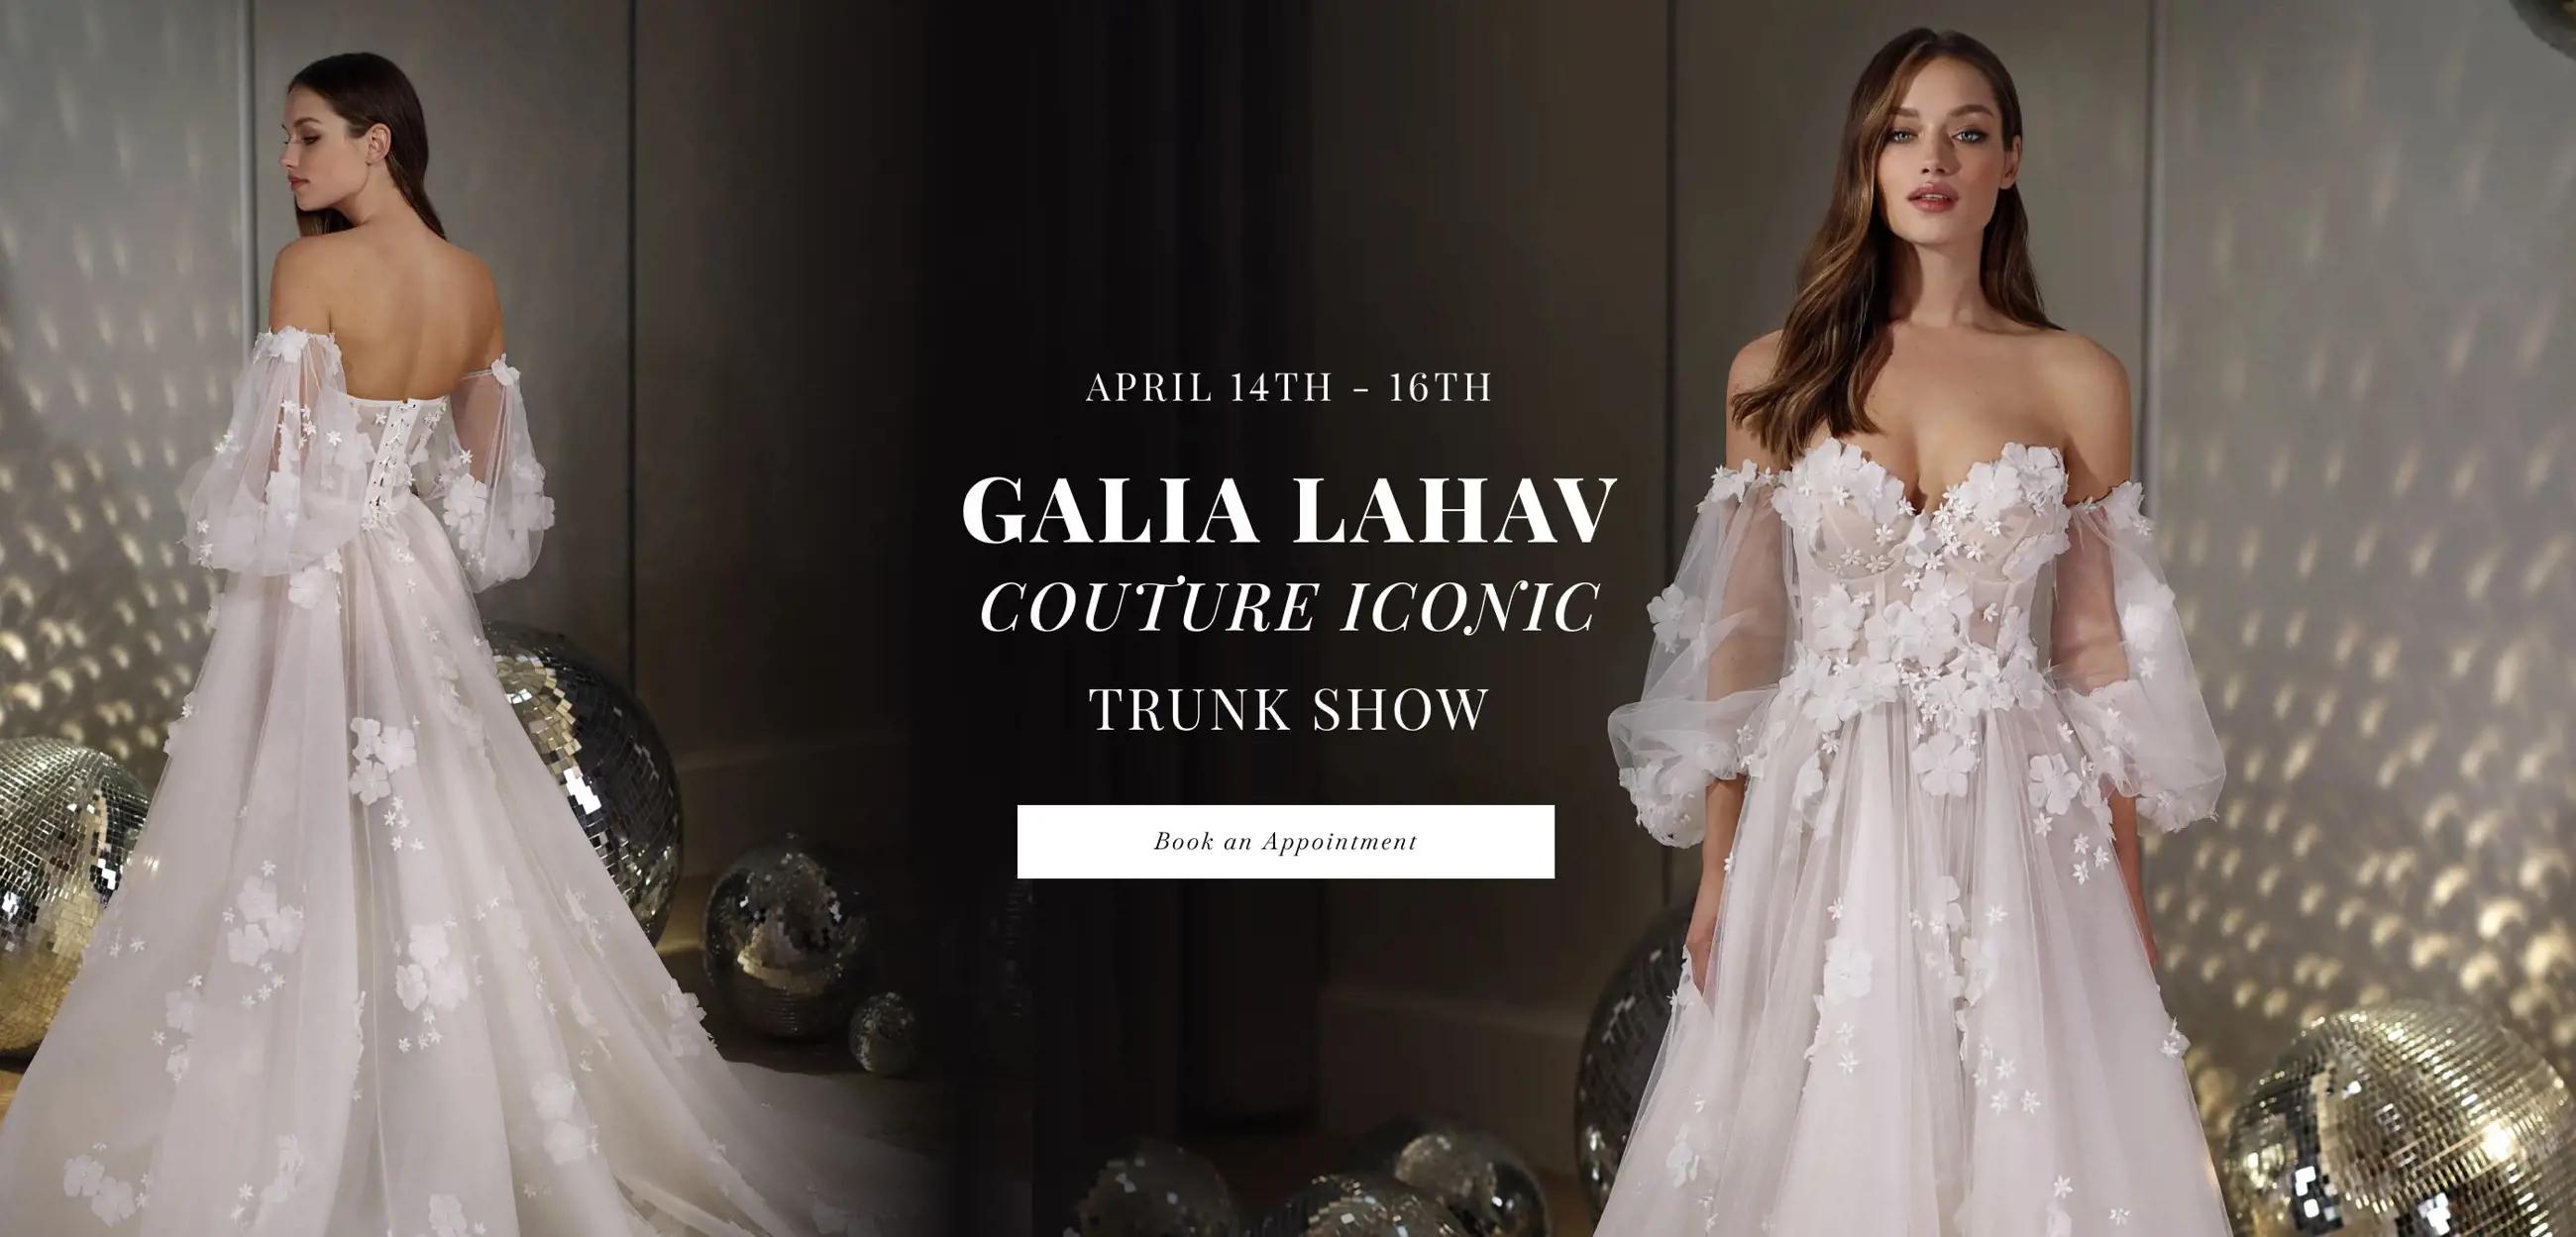 "Galia Lahav Couture Iconic Trunk Show" banner for desktop